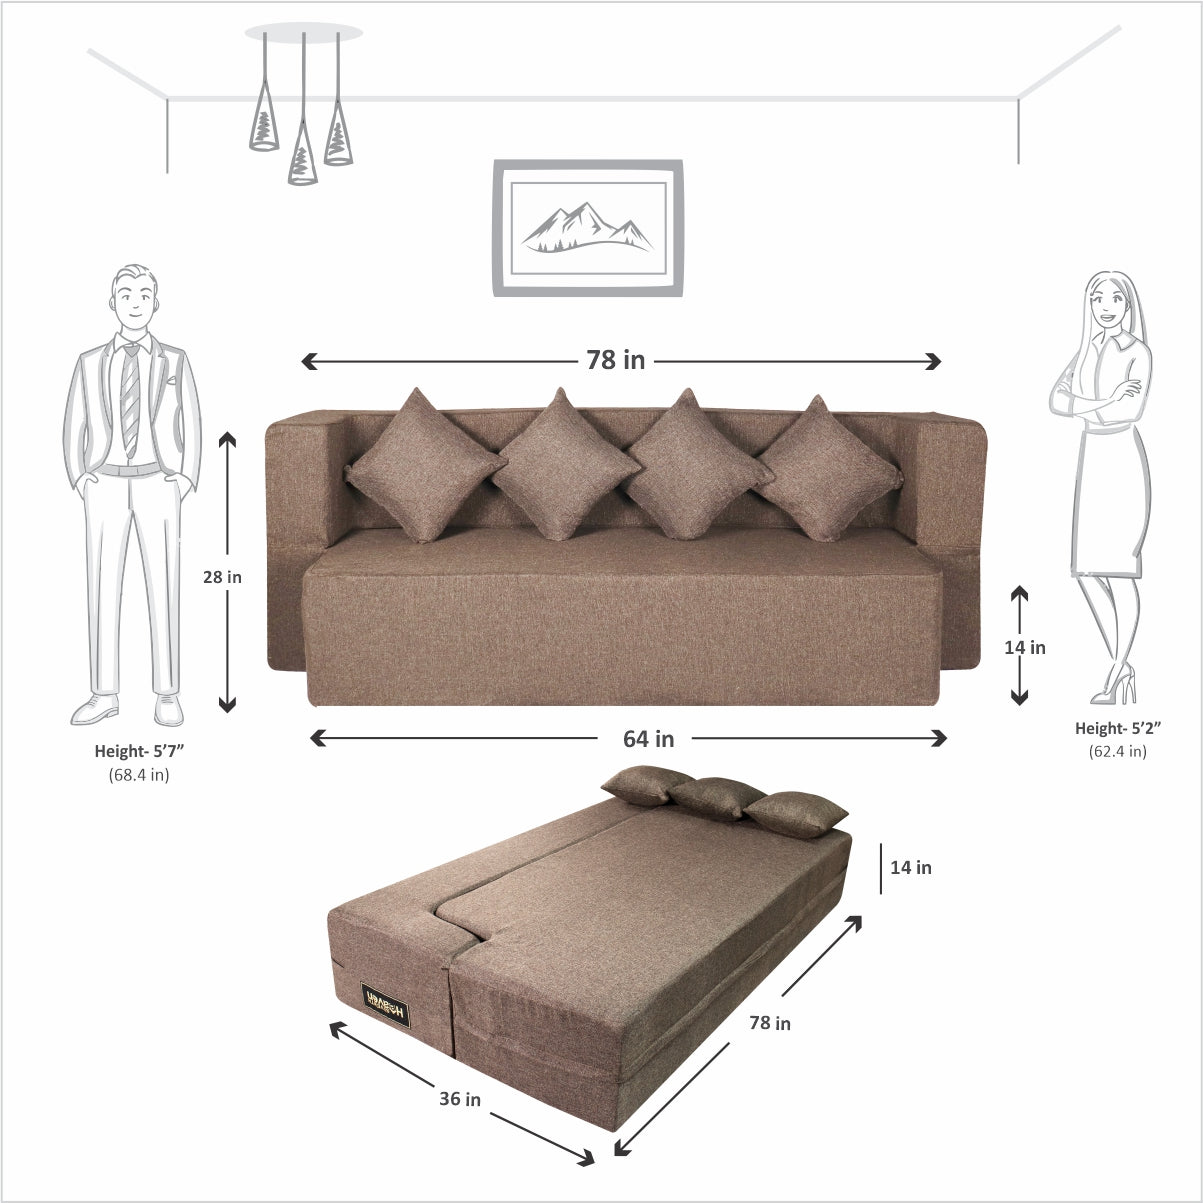 Cover of Brown Jute Fabric (78"x36"x14") FlipperX Sofa cum Bed with 4 Plain Cushion Covers